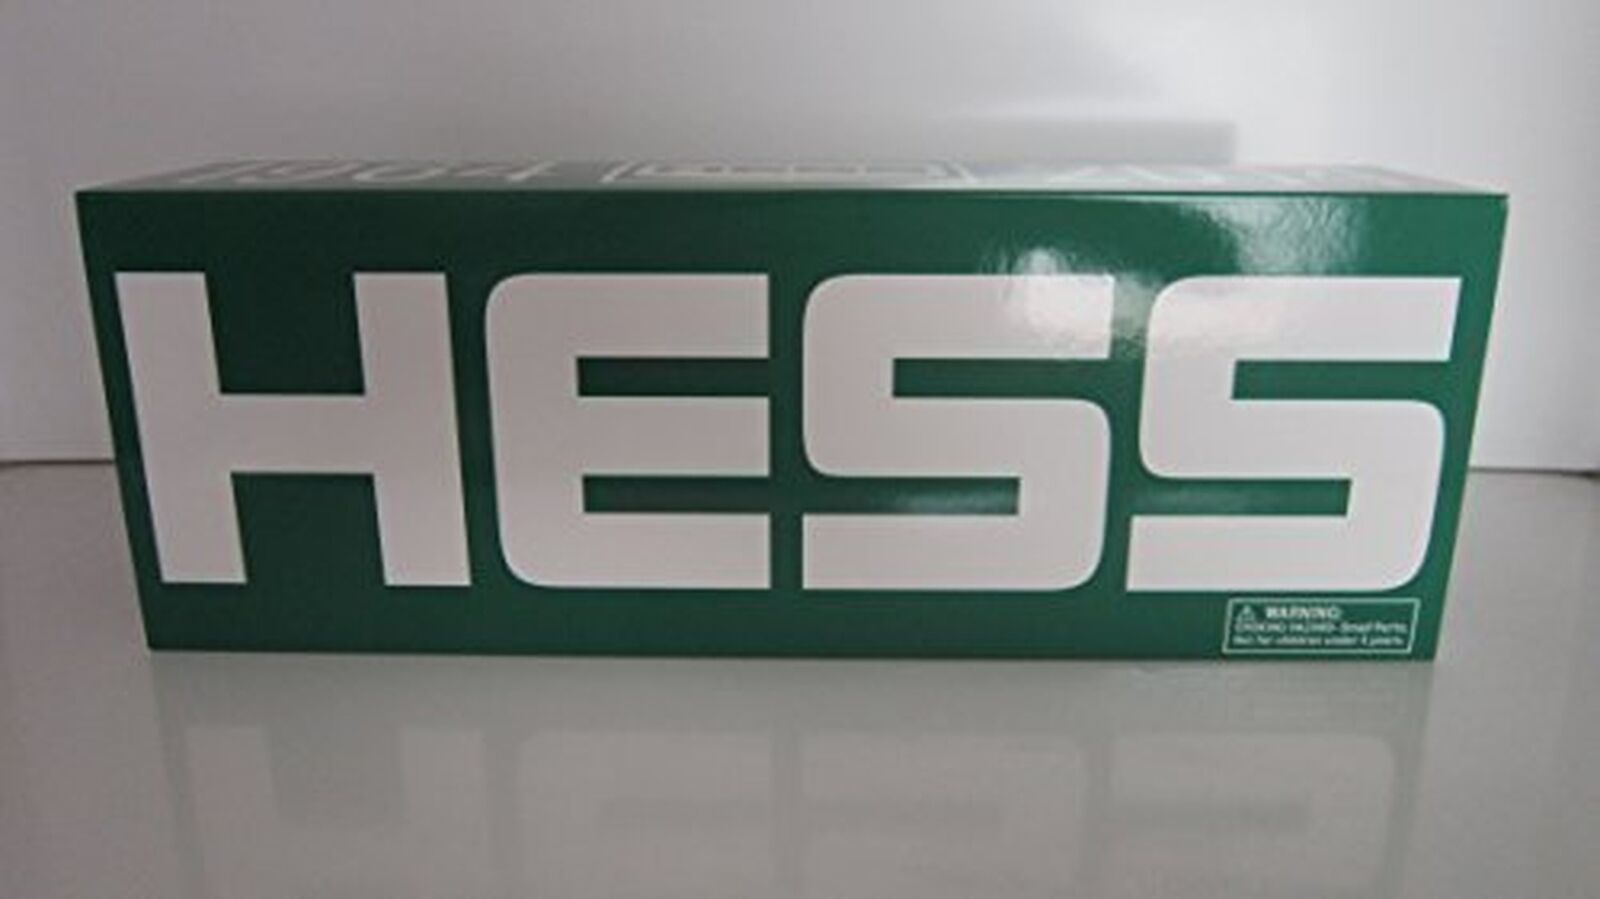 Hess 2014 1964 Toy Truck 50th Anniversary Collector Edition Limited Edition